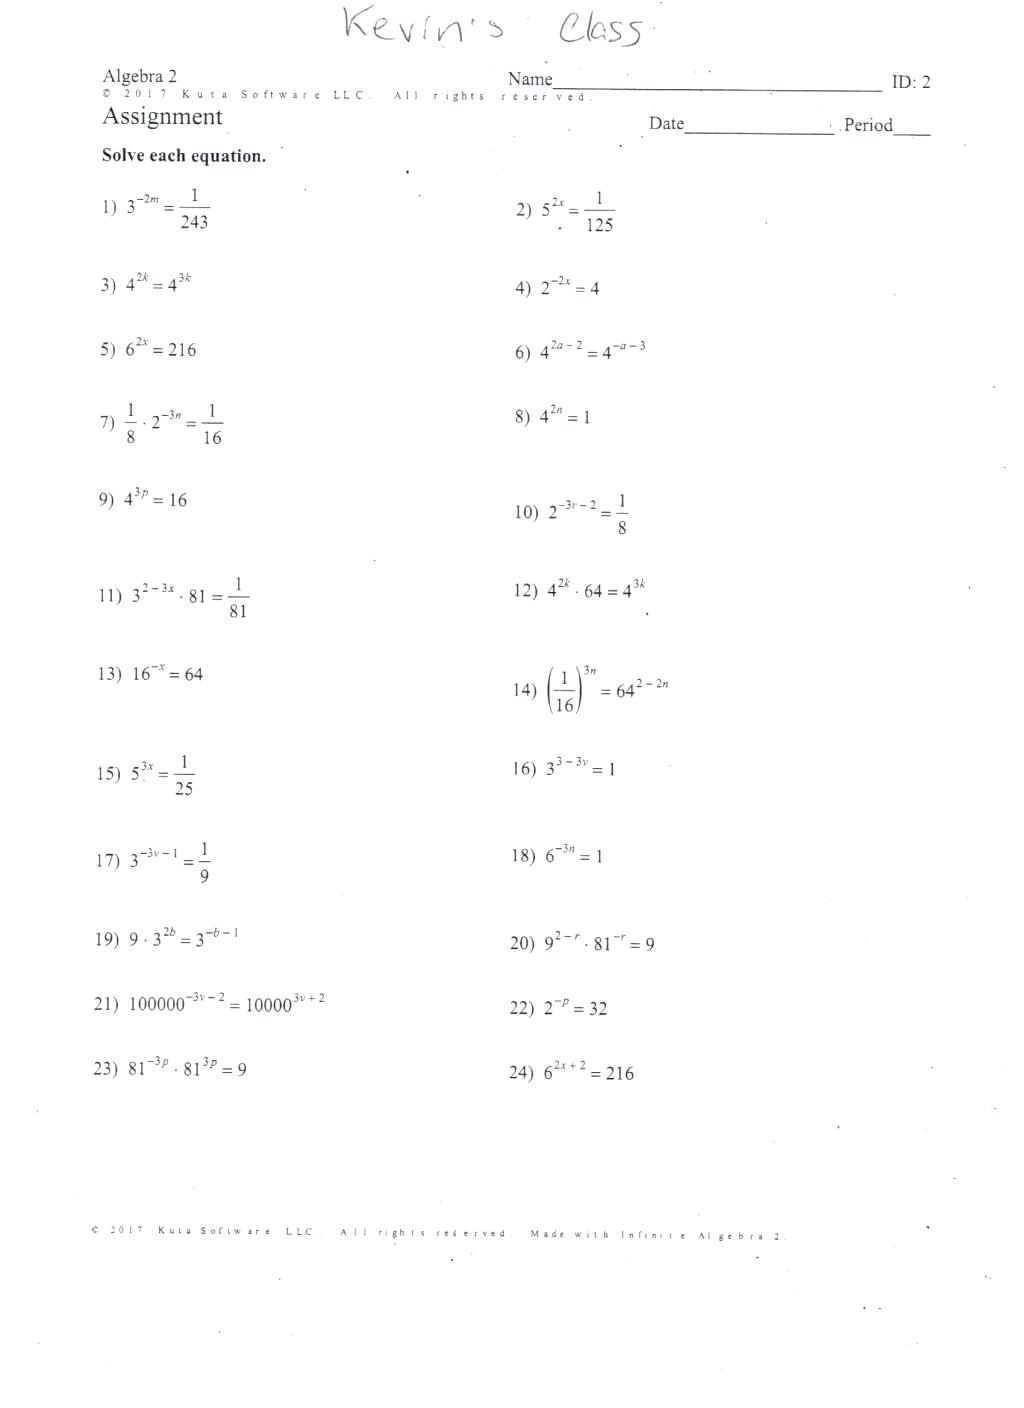 Factoring Quadratic Expressions Worksheet Answers